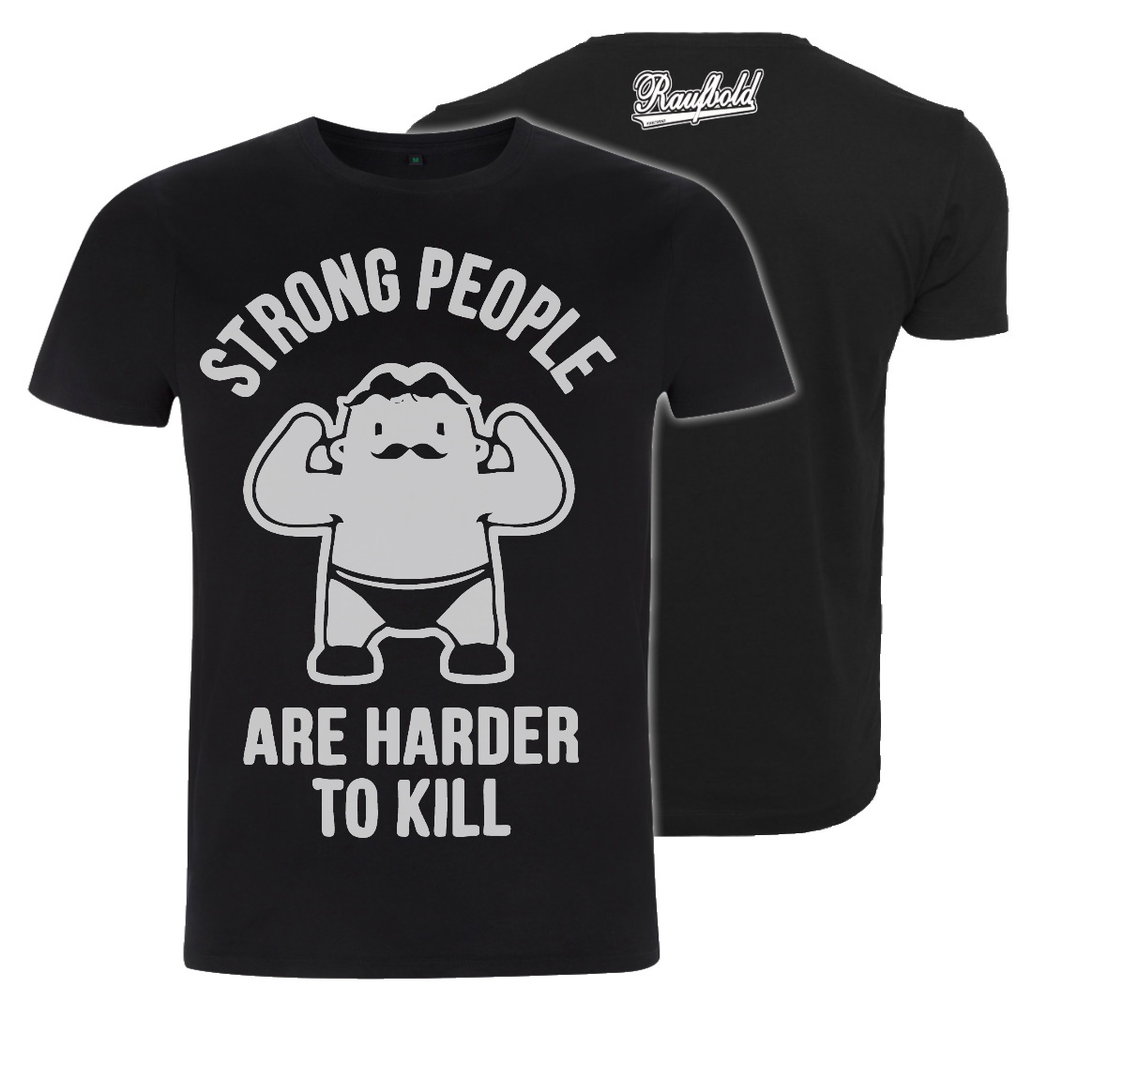 Shirt"STRONG PEOPLE"